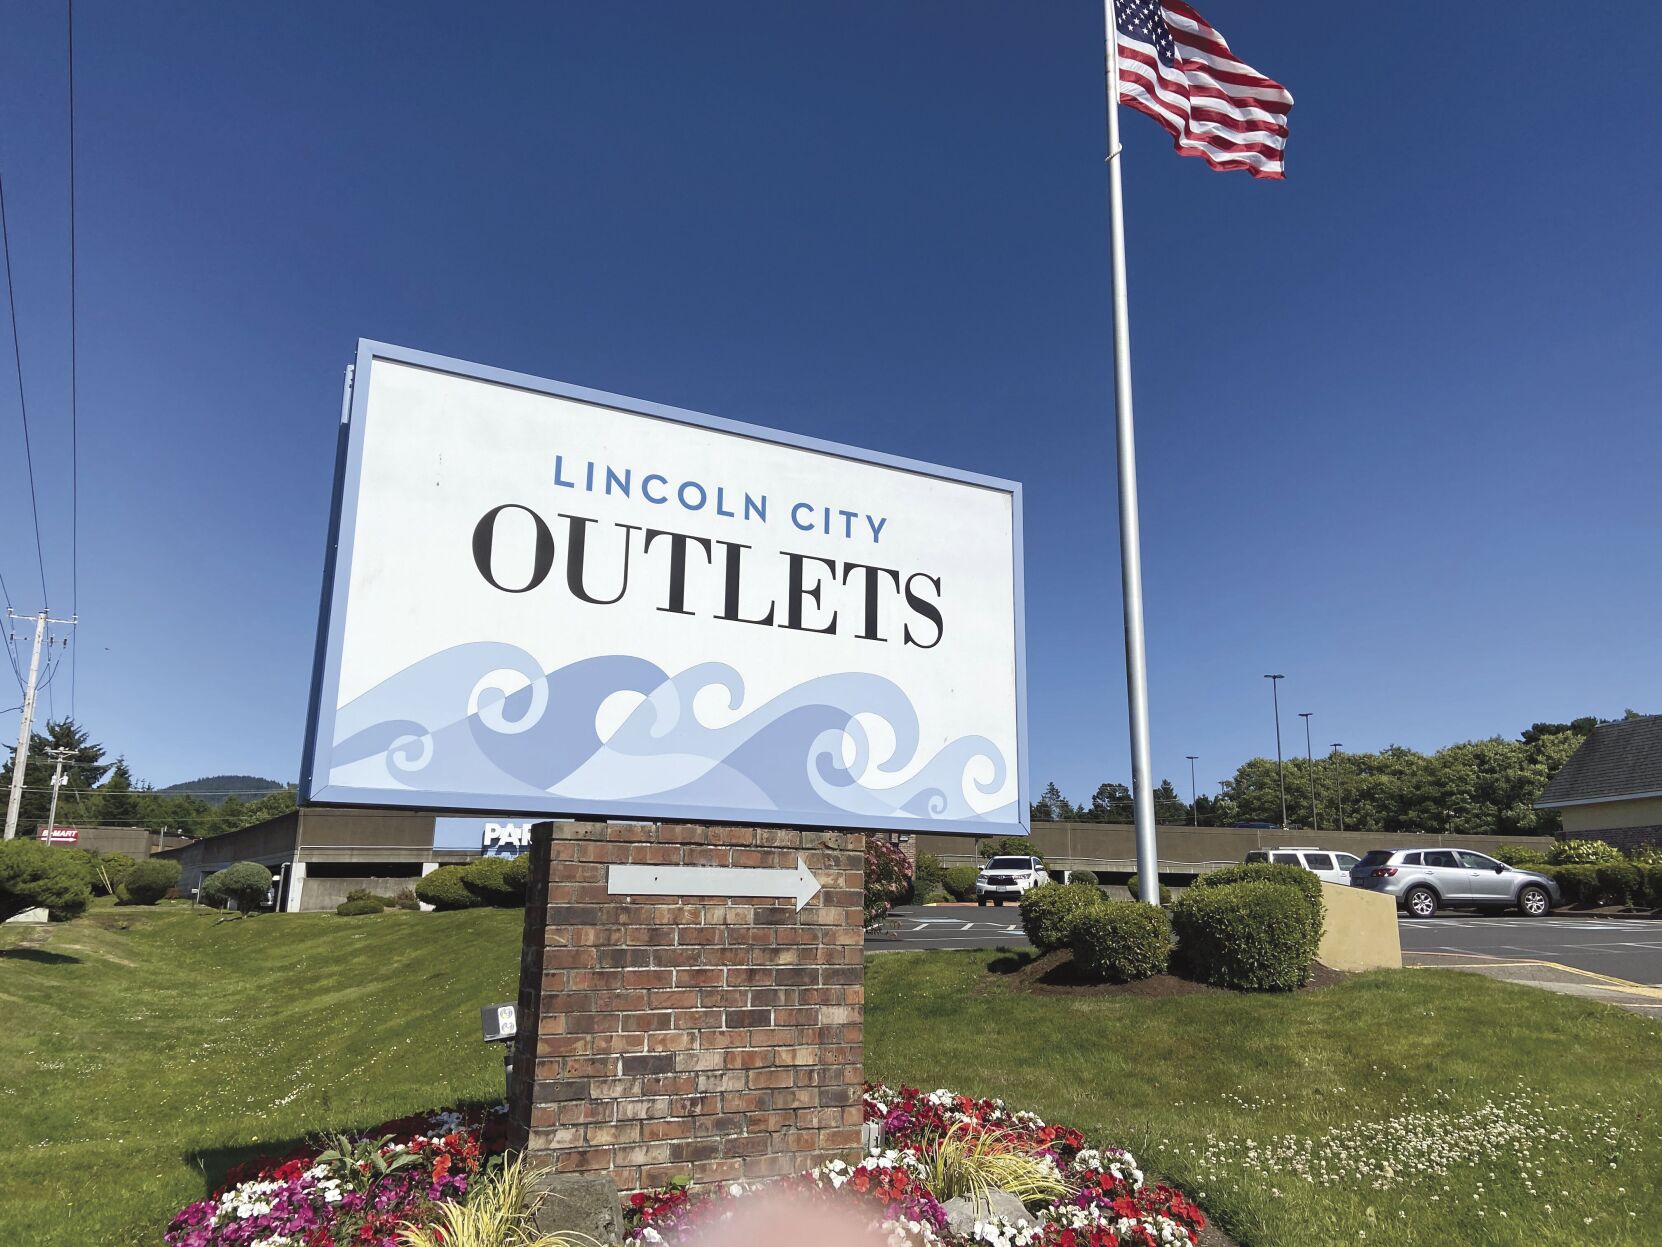 Most shops open at Lincoln City Outlets 